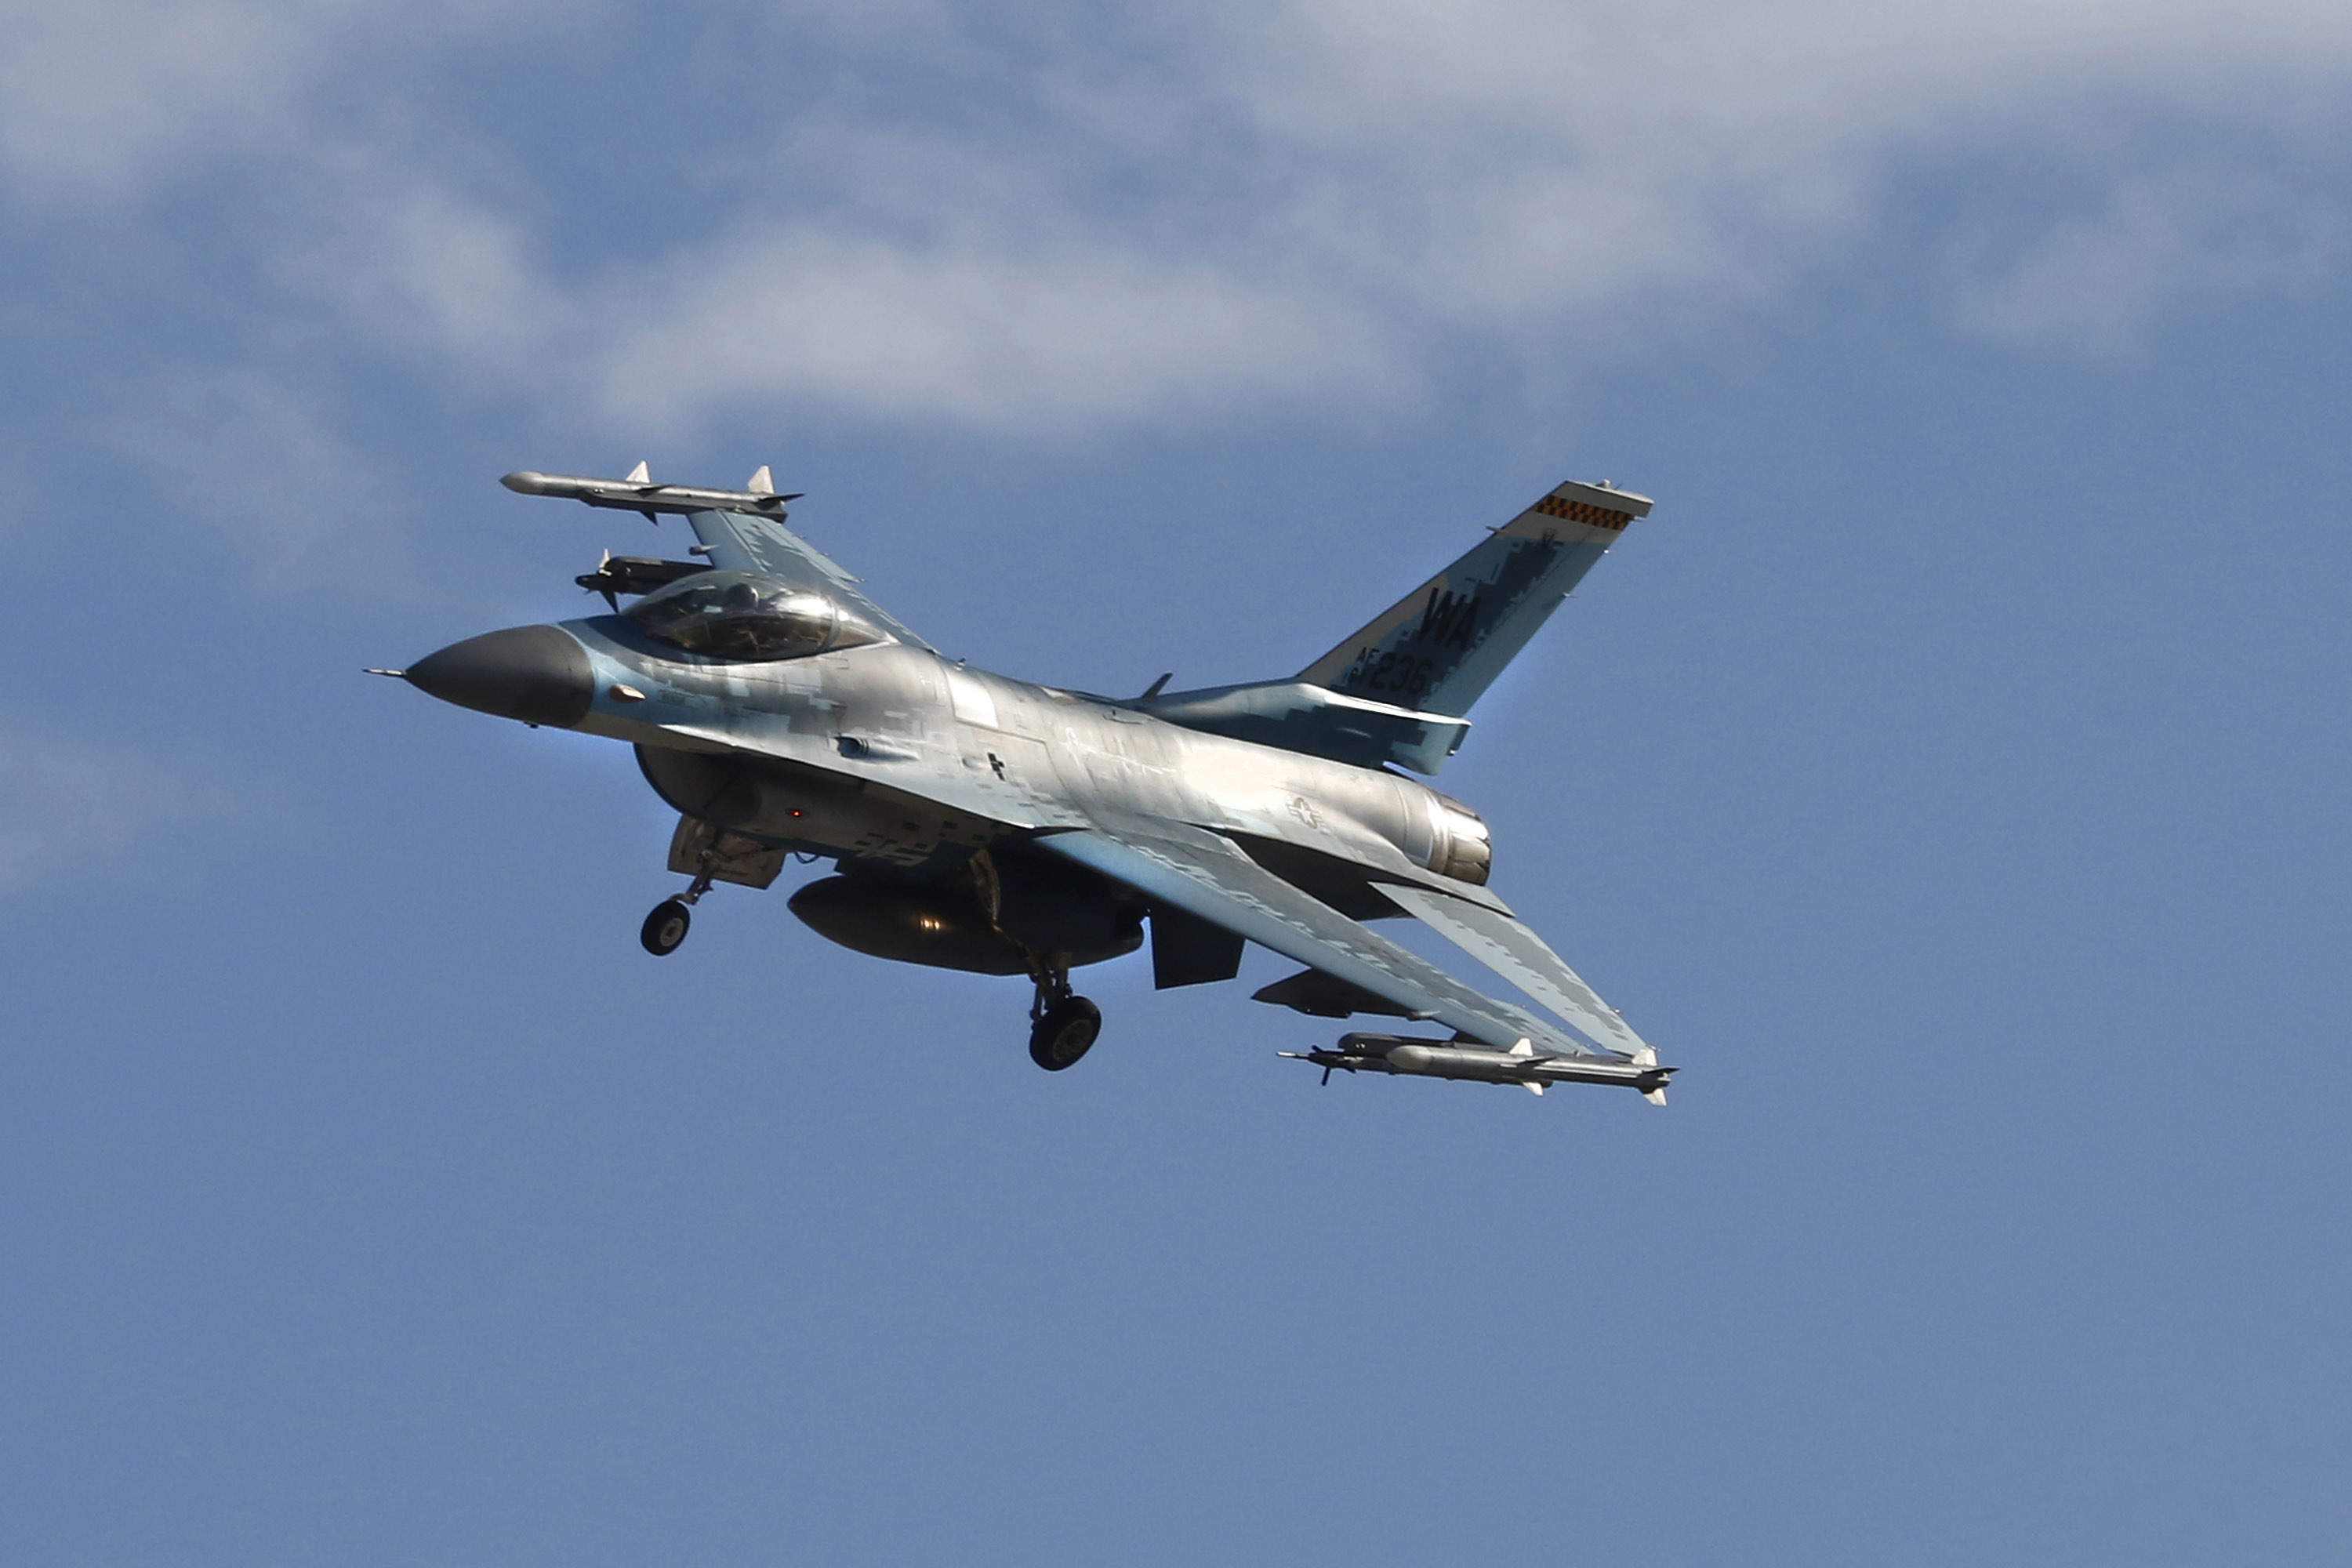 An F-16C Fighting Falcon fighter jet